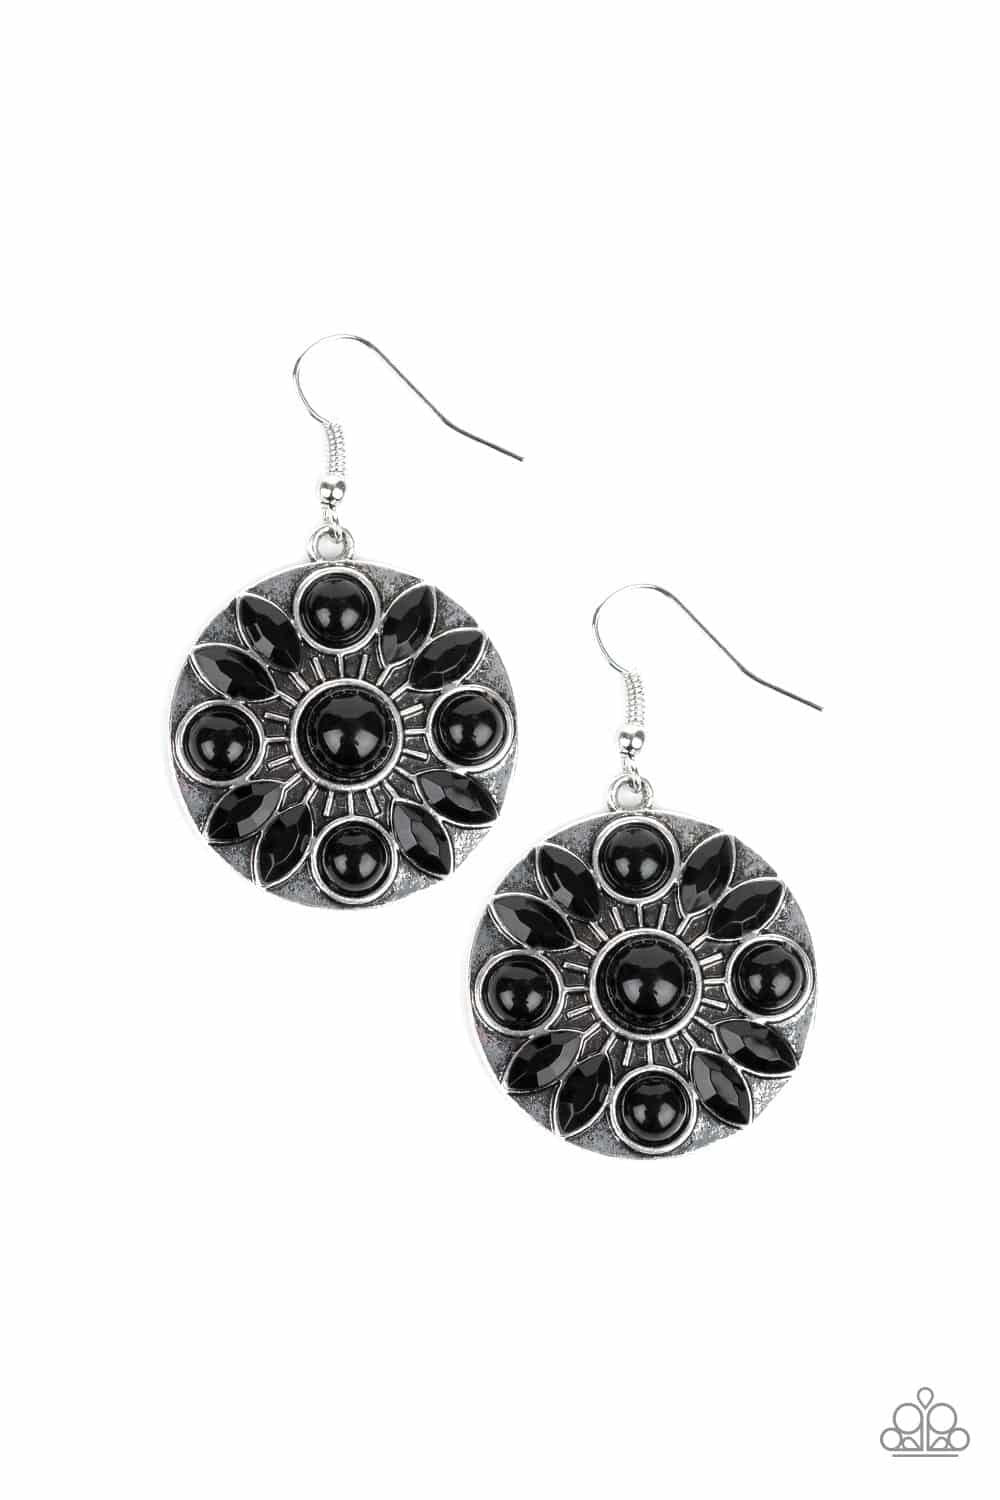 Paparazzi Accessories Petal Paradise - Black A collection of black beads and glittery black marquise style rhinestones swirl around the center of a shimmery silver disc, coalescing into a whimsical floral frame. Earring attaches to a standard fishhook fit